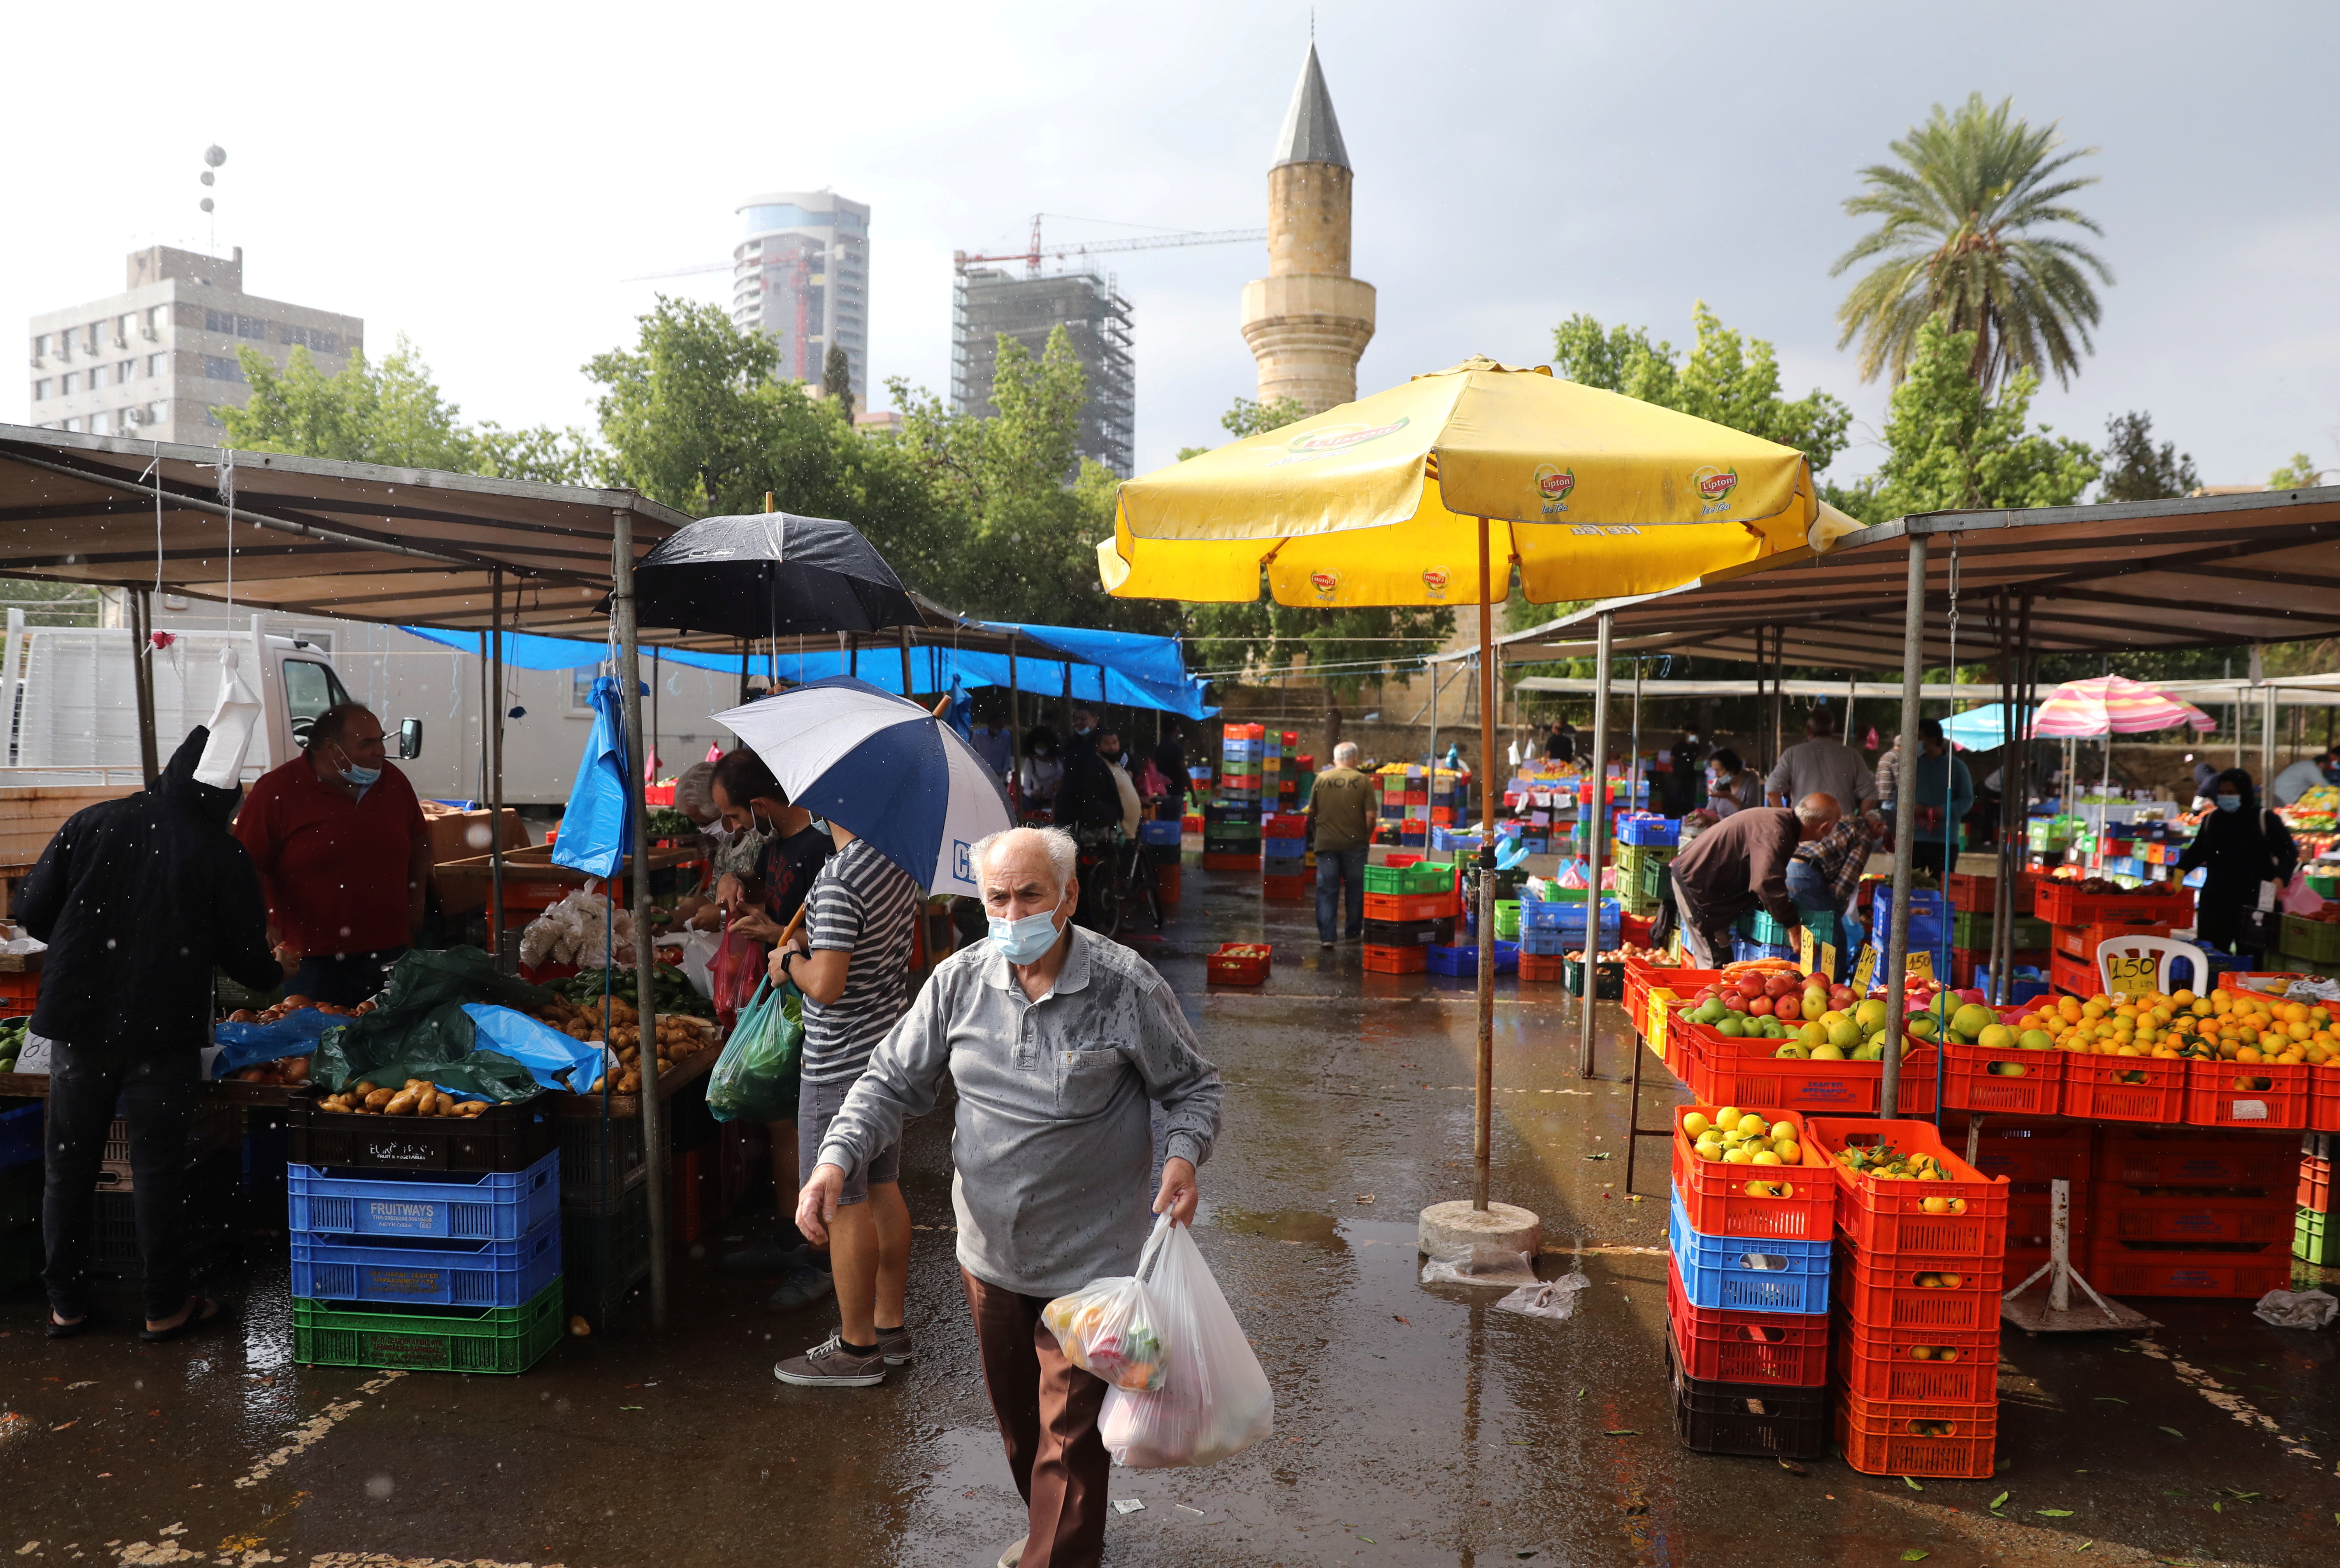 A man wearing a protective face mask walks in a local market amid the coronavirus disease (COVID-19) pandemic, in Nicosia